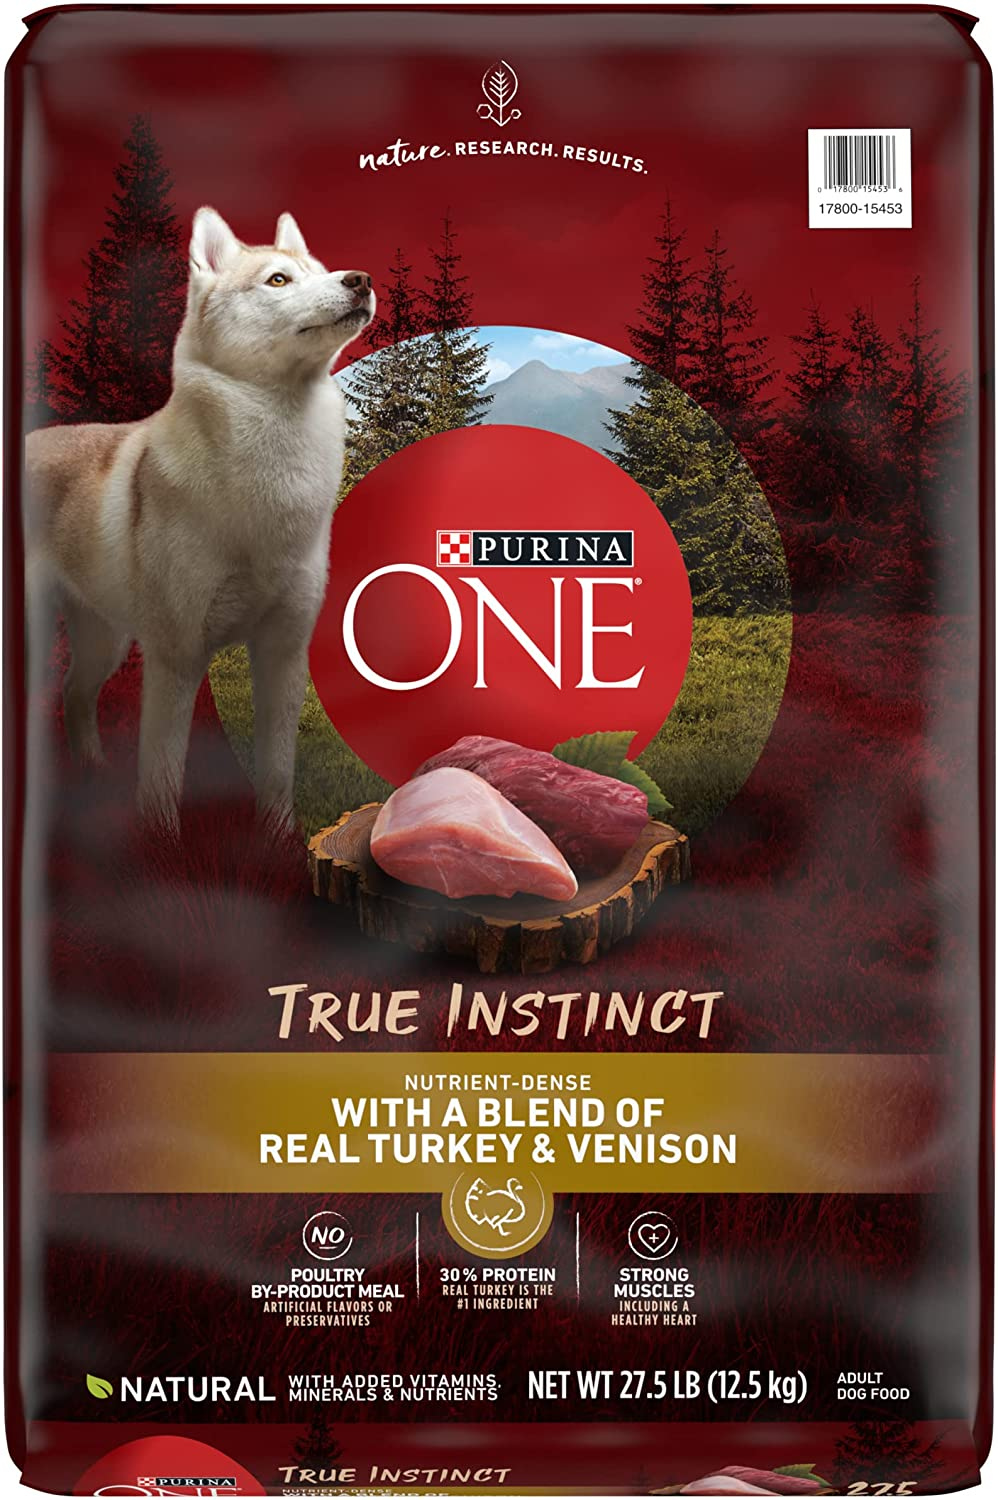 Purina One High Protein Natural Dry Dog Food True Instinct 12 5 Kg 